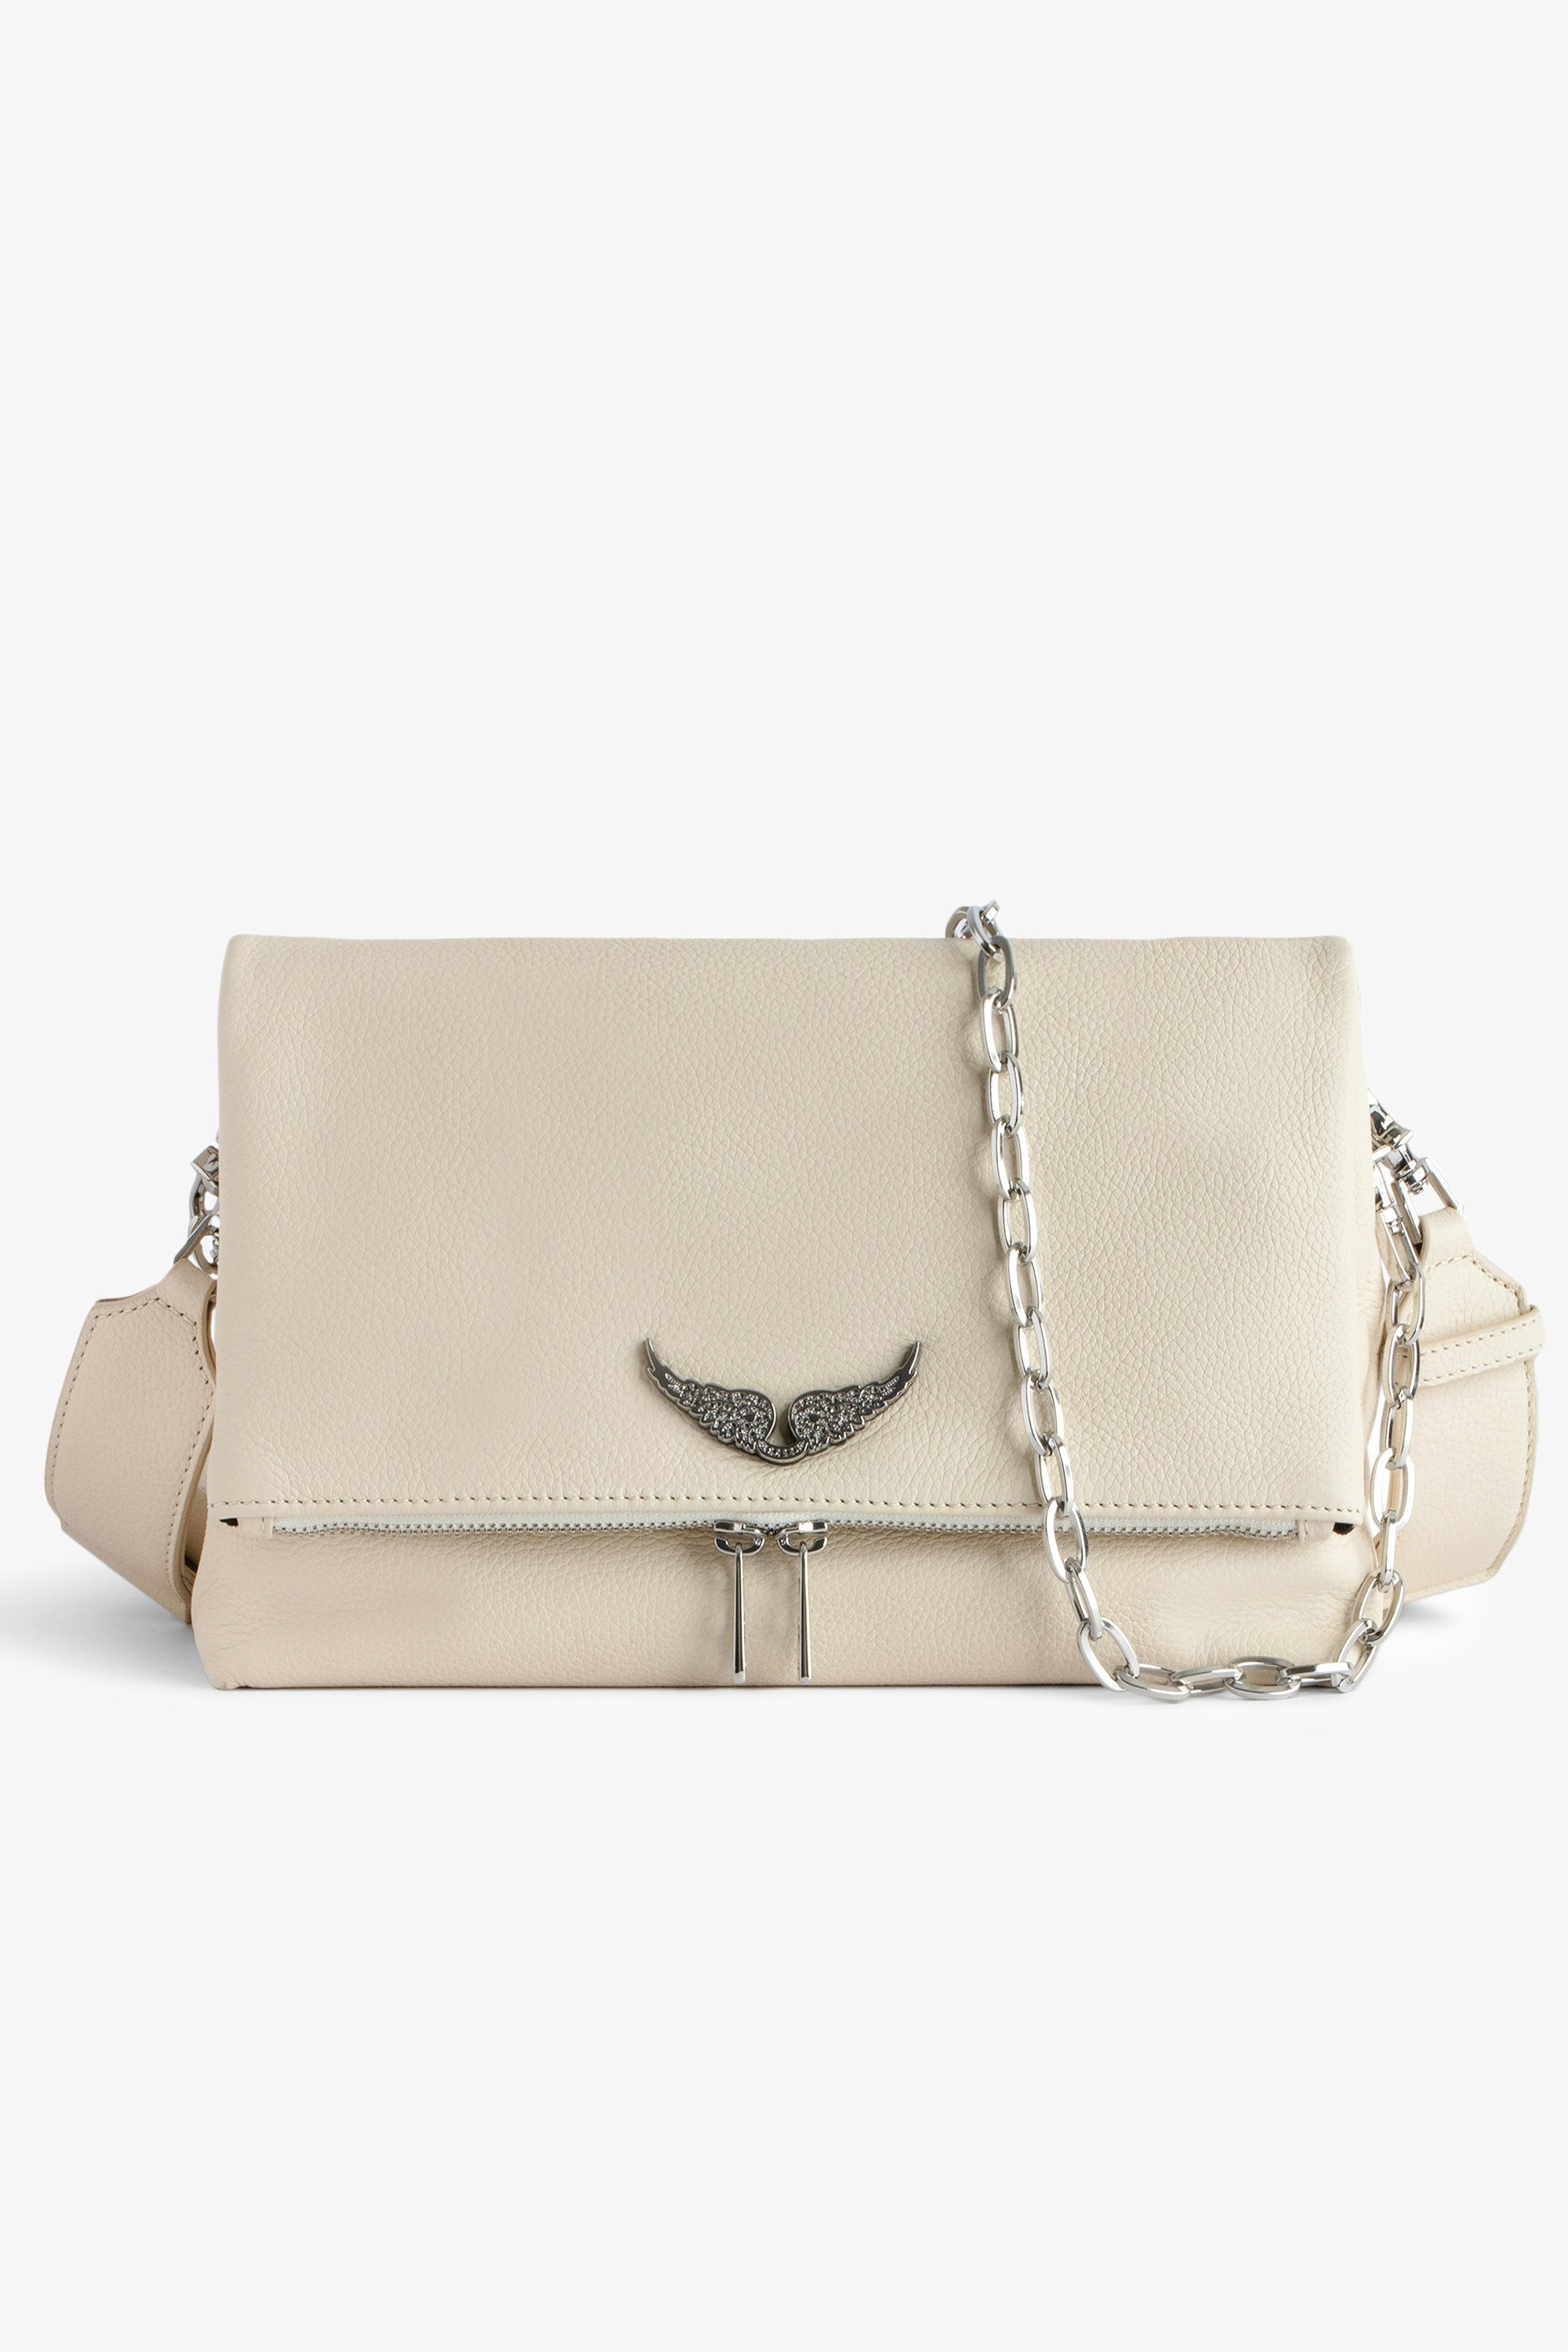 Swing Your Wings Rocky Bag - Women’s white leather Rocky bag with silver-toned metal shoulder strap